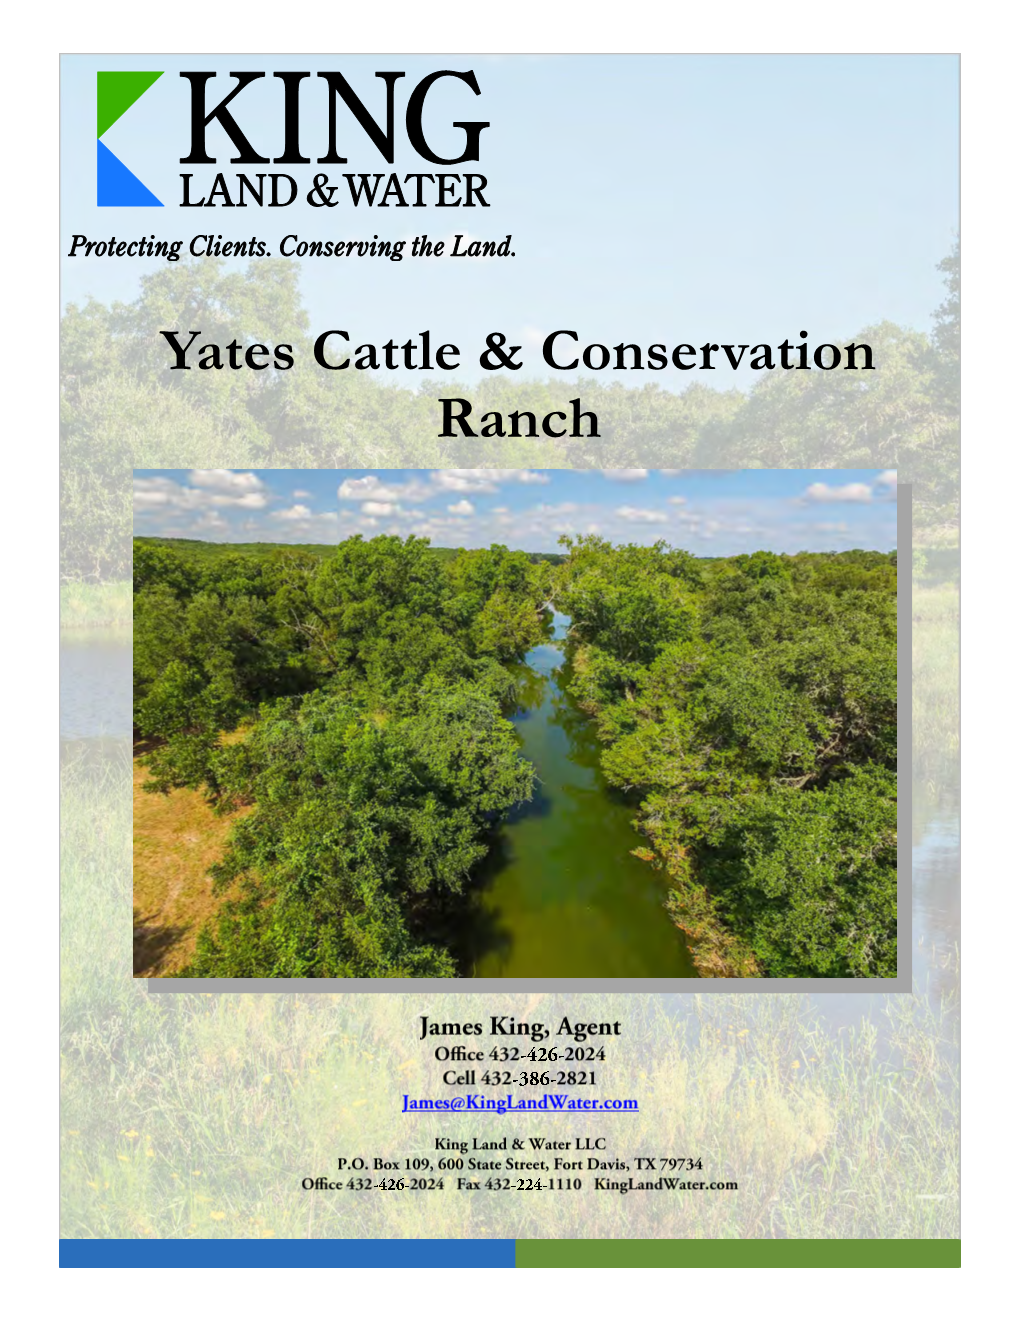 Yates Cattle & Conservation Ranch